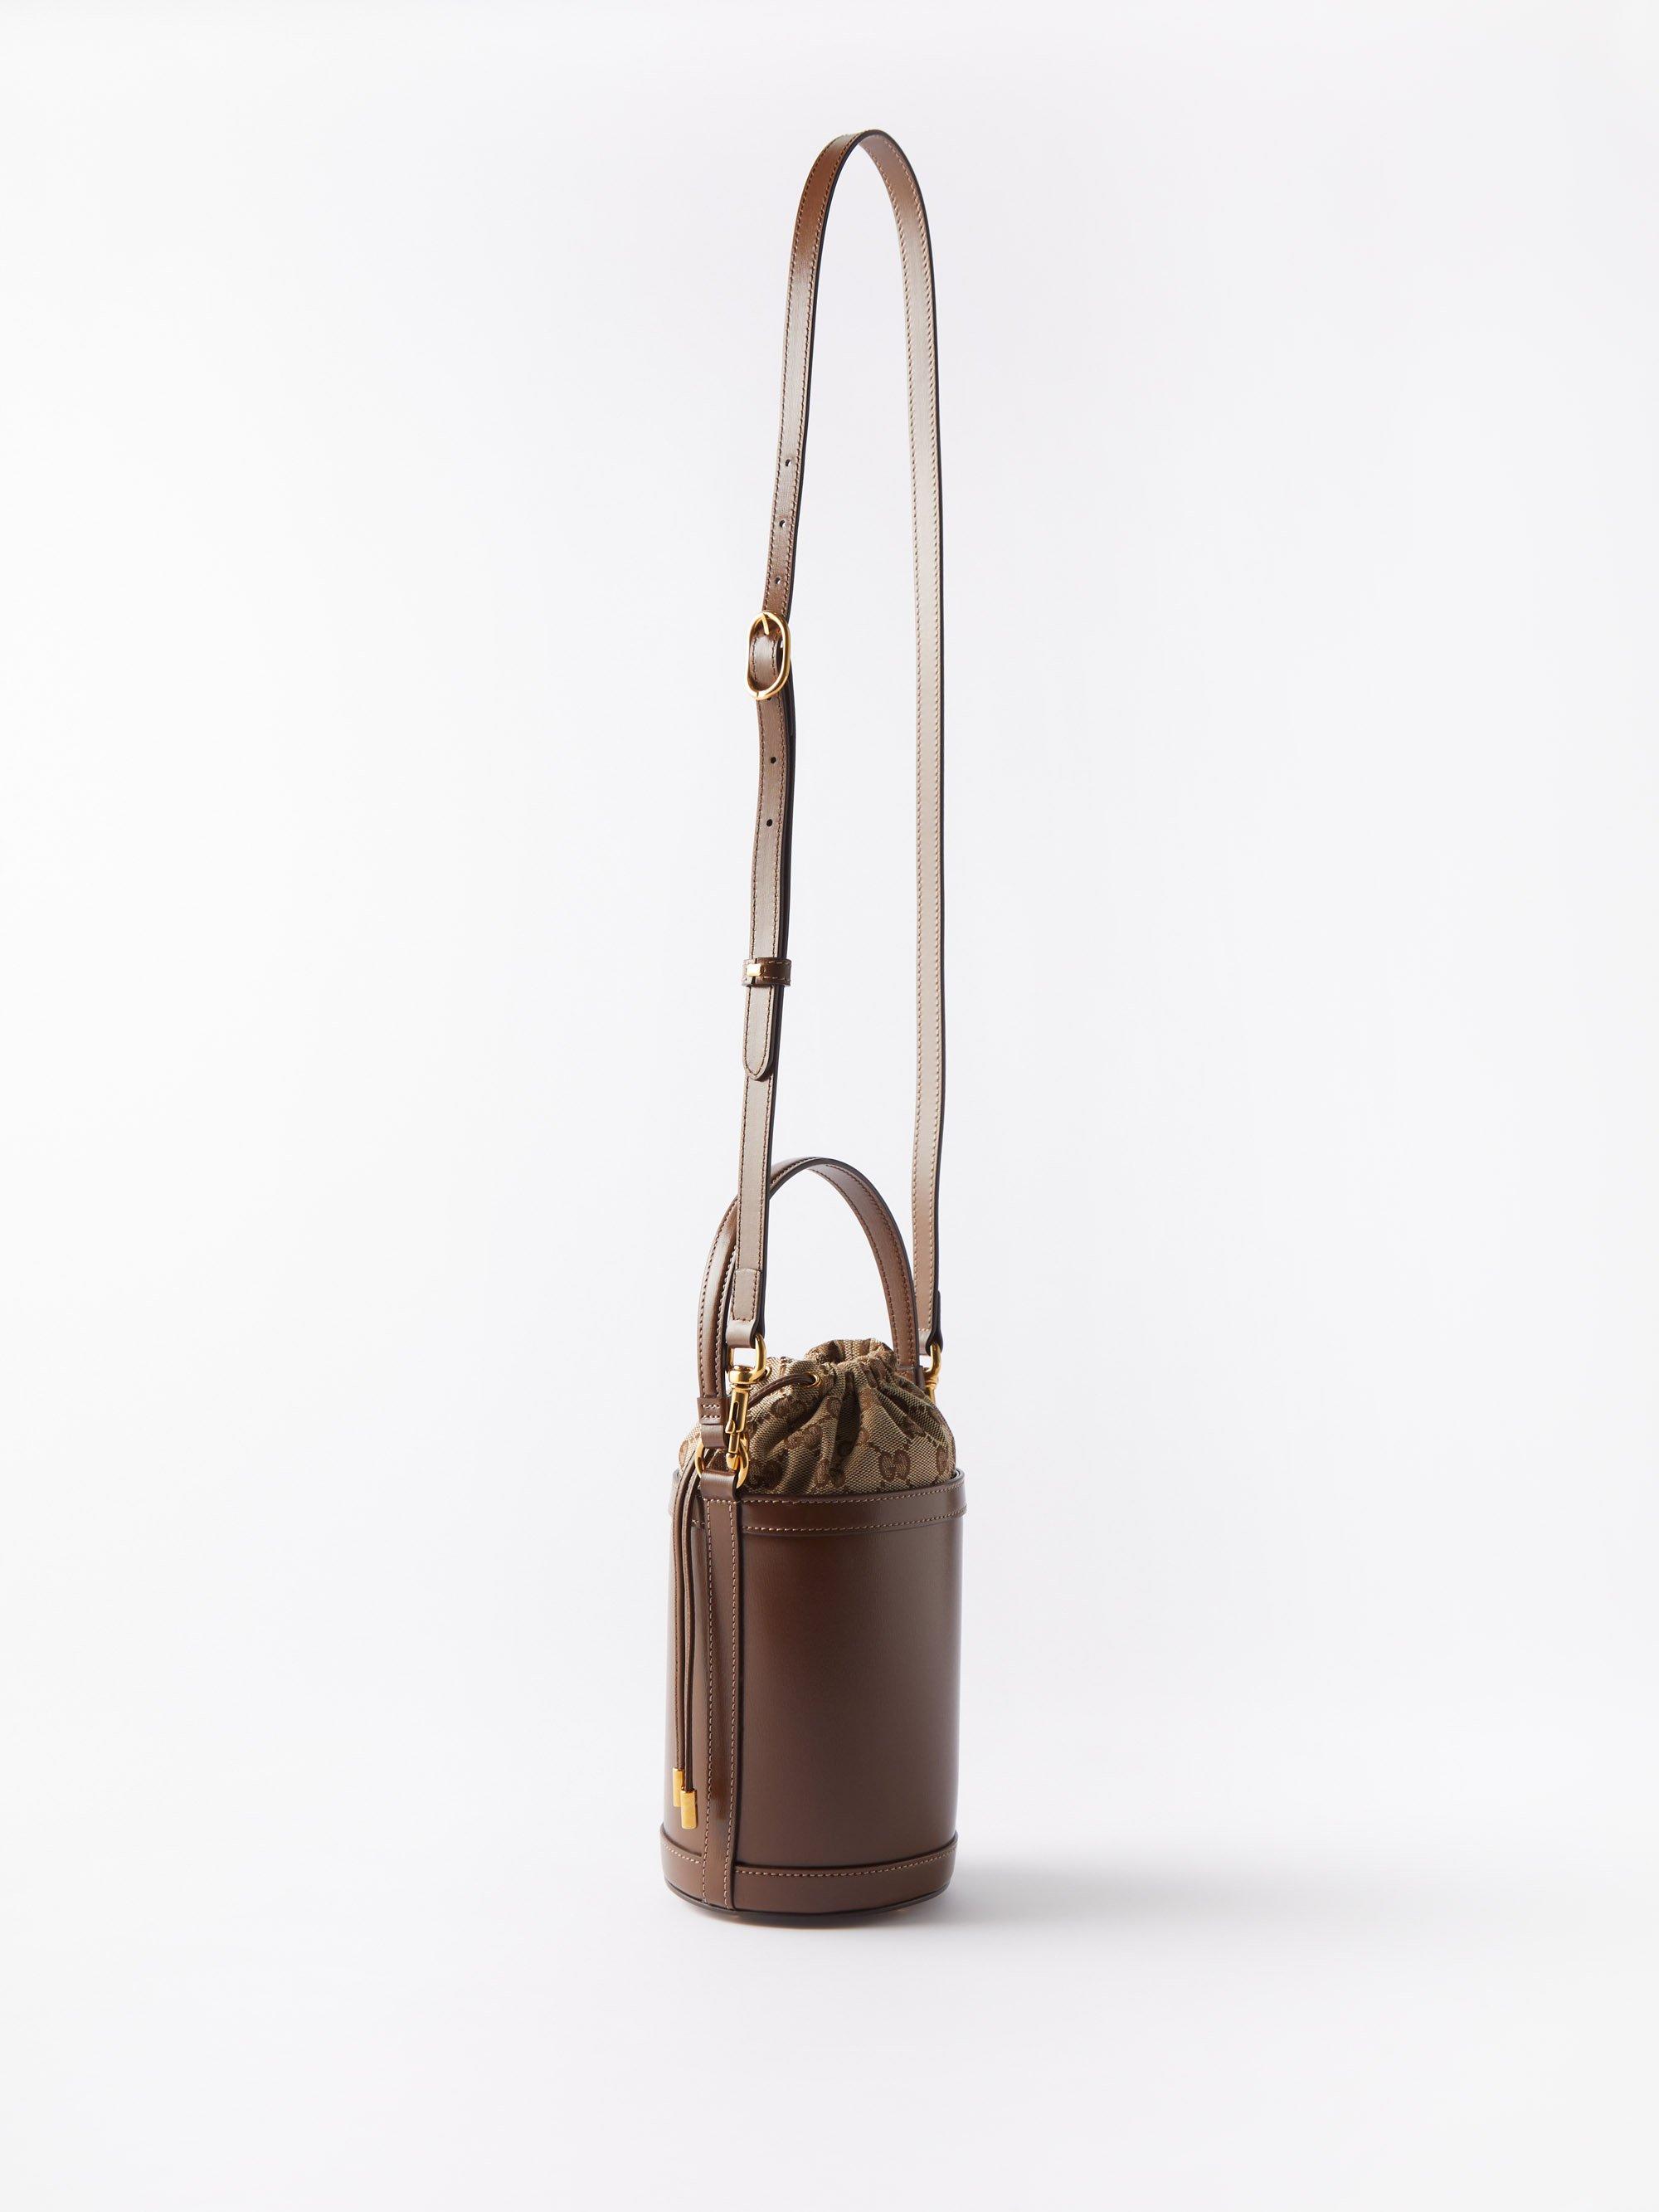 Gucci Ophidia Bucket Bag GG Coated Canvas Mini Brown 2233691